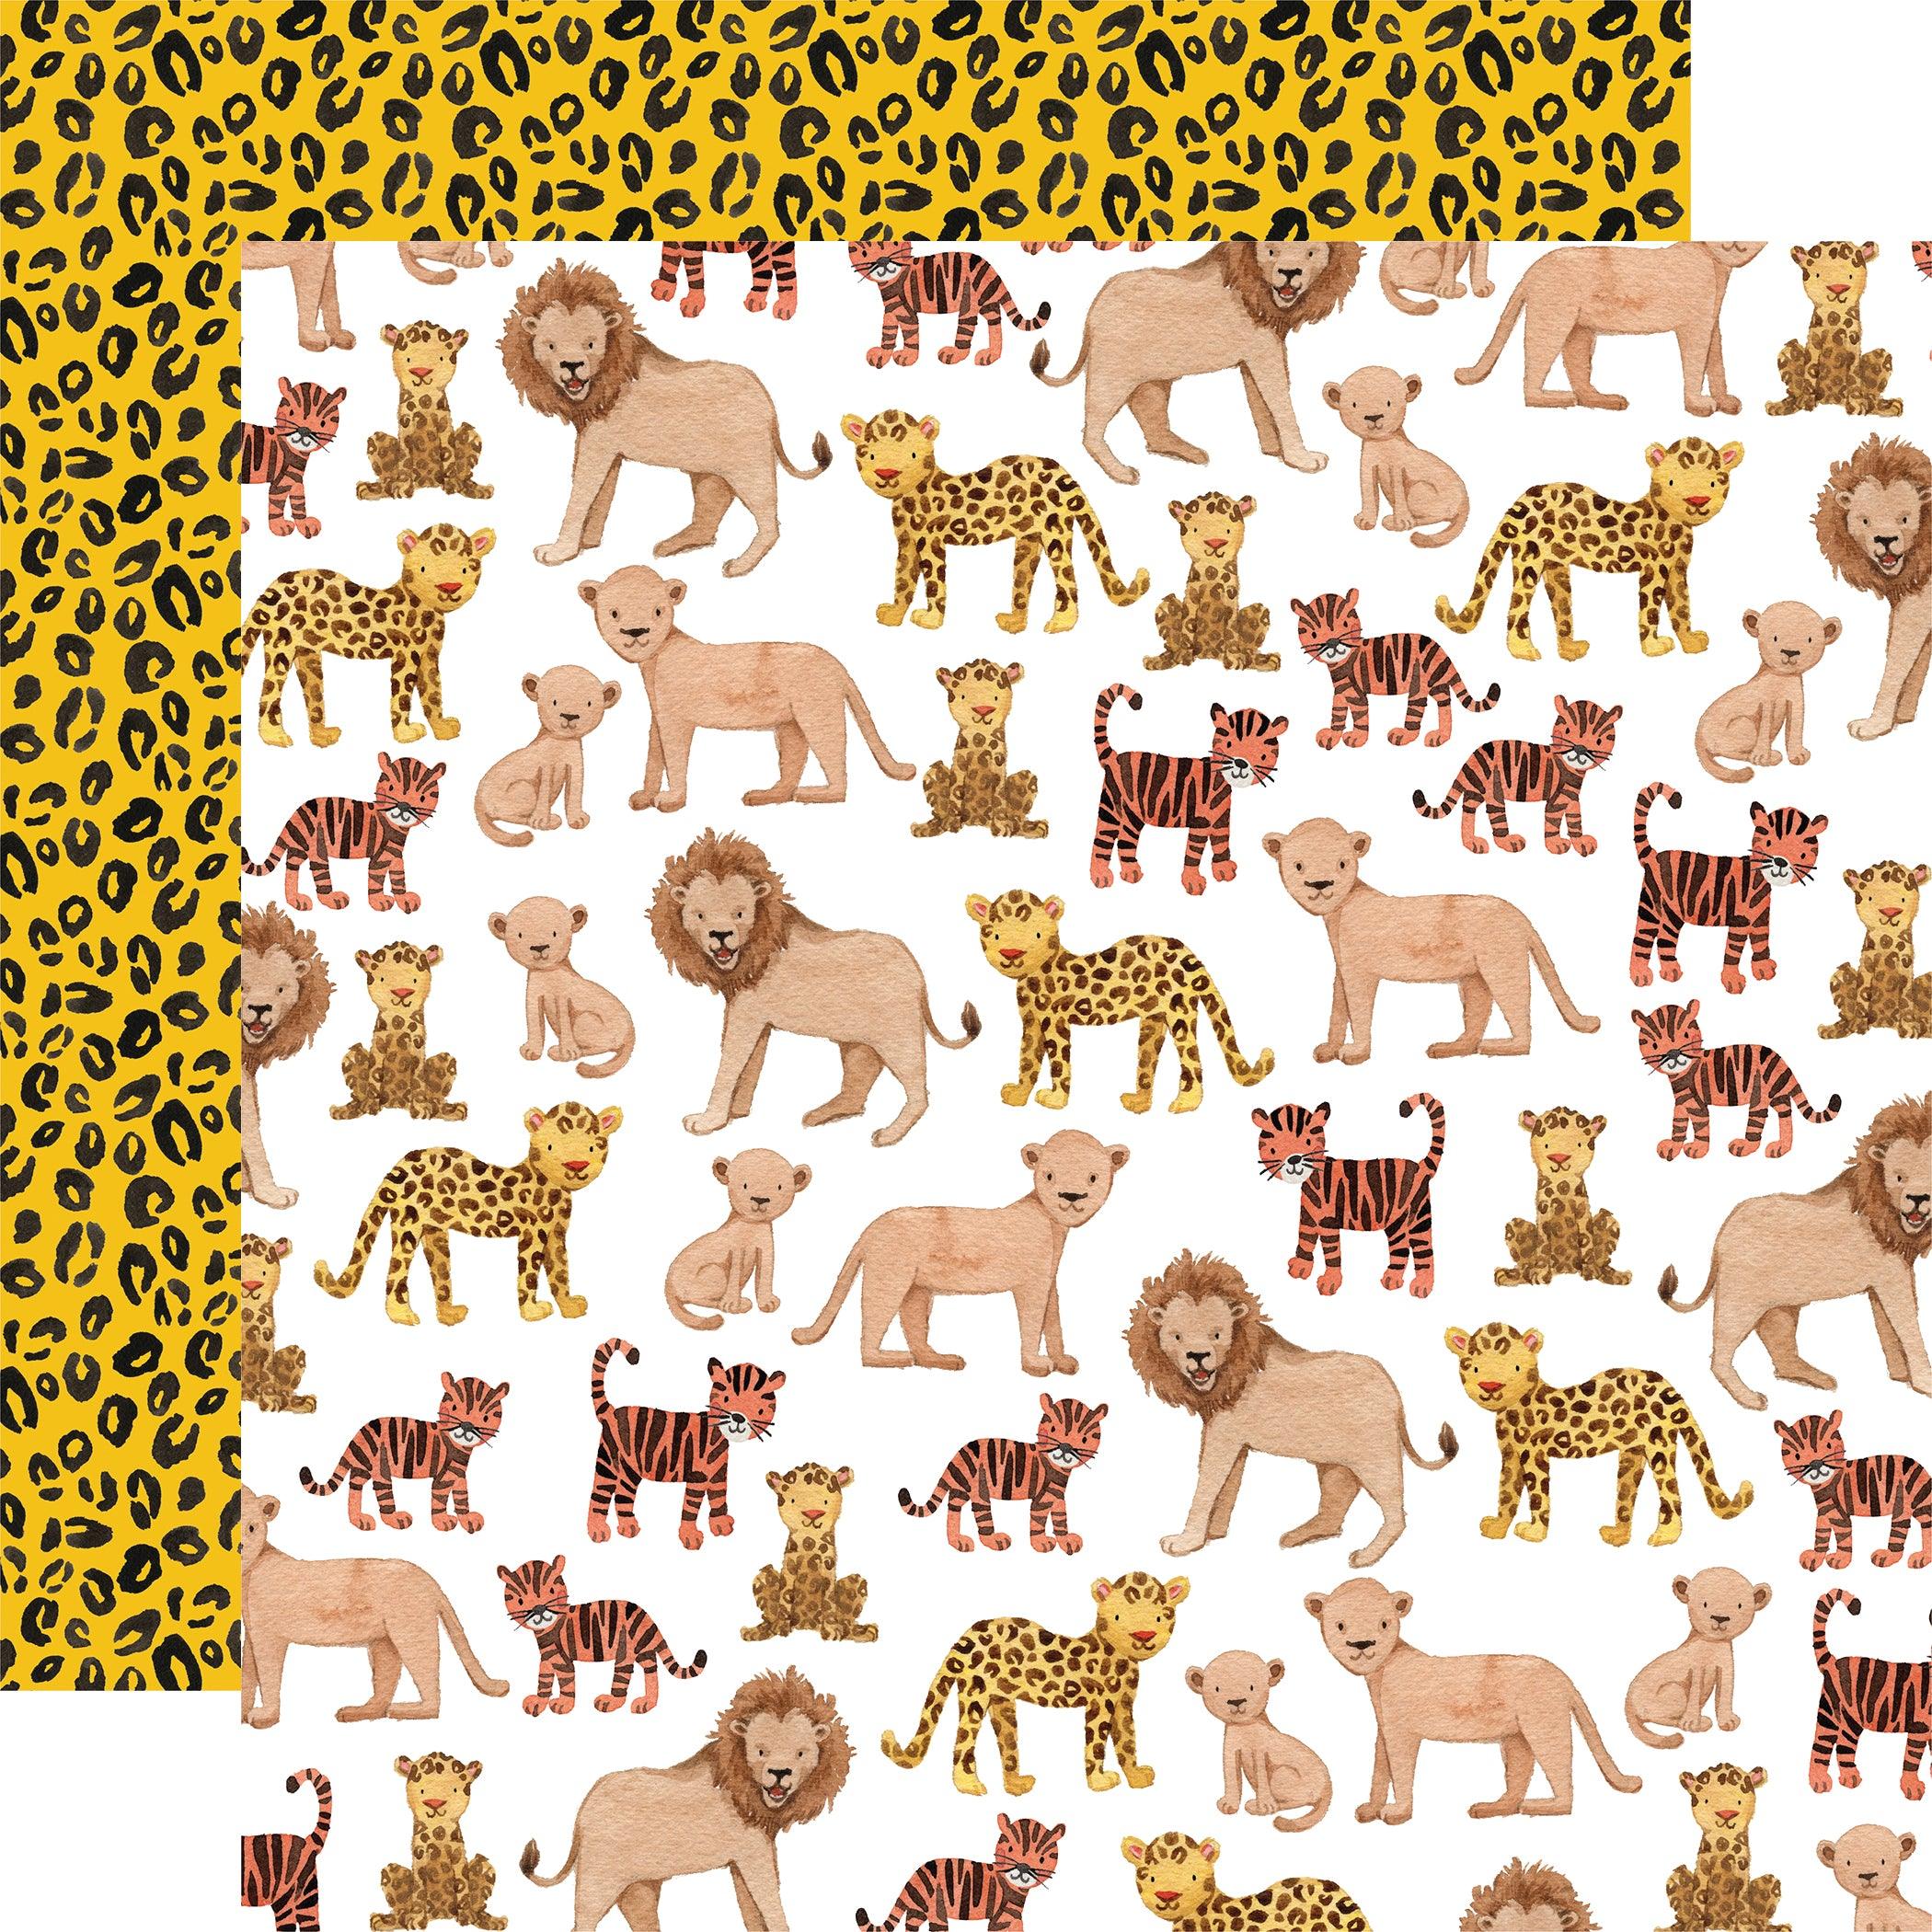 Animal Kingdom Collection Feline Family 12 x 12 Double-Sided Scrapbook Paper by Echo Park Paper - Scrapbook Supply Companies